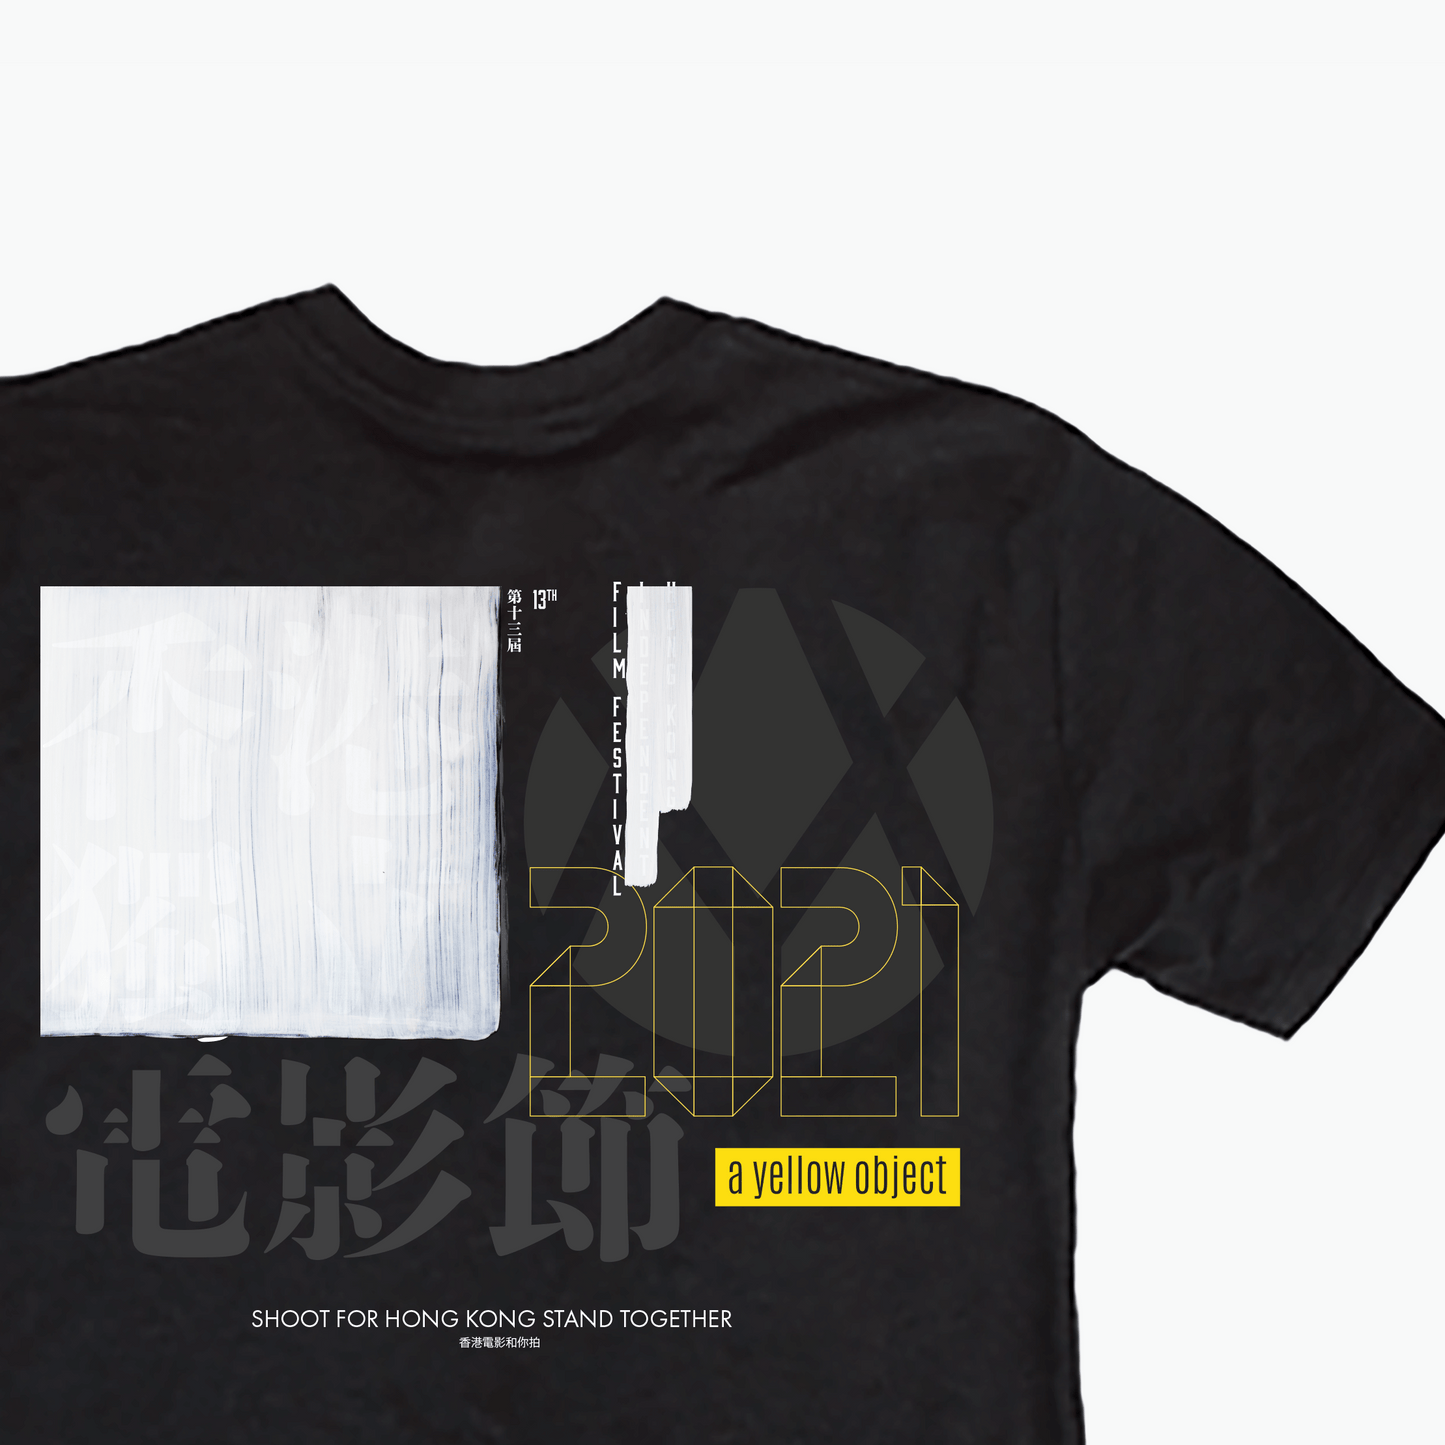 HKINDIEFF 13th T-Shirt (Black) - A Yellow Object